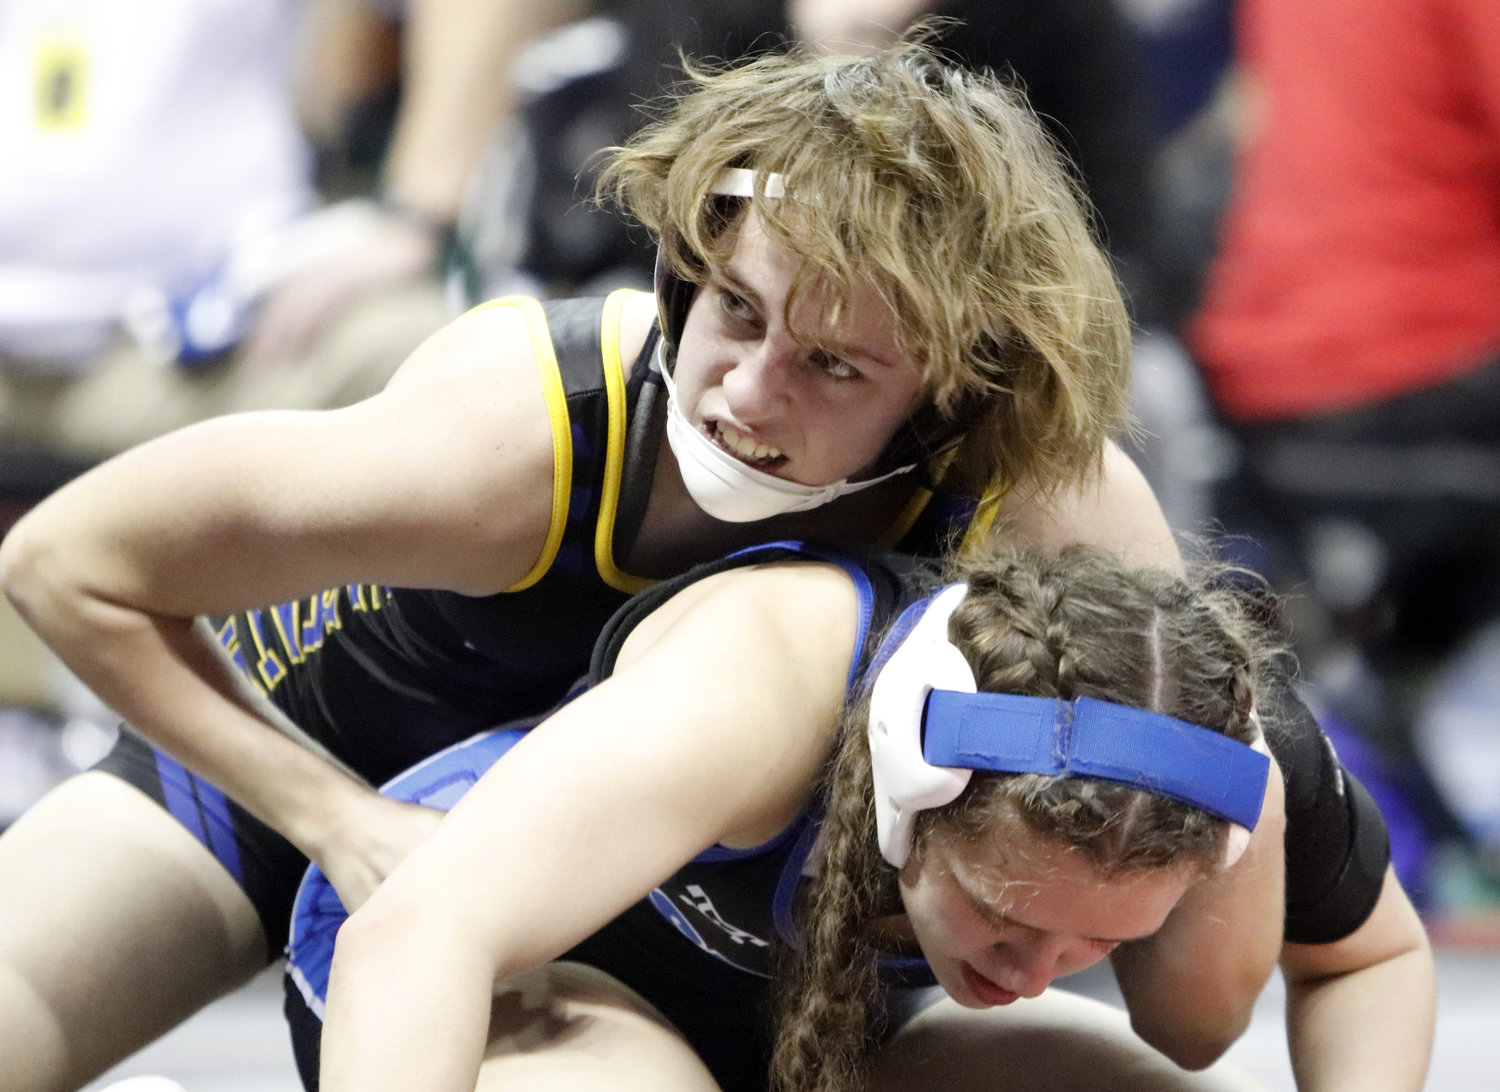 Wright City freshman Kali Jensen (top) wrestles against Louzella Graham during the opening round of the state tournament. Jensen won her last two matches of the day and will wrestle in the third round wrestlebacks tomorrow.